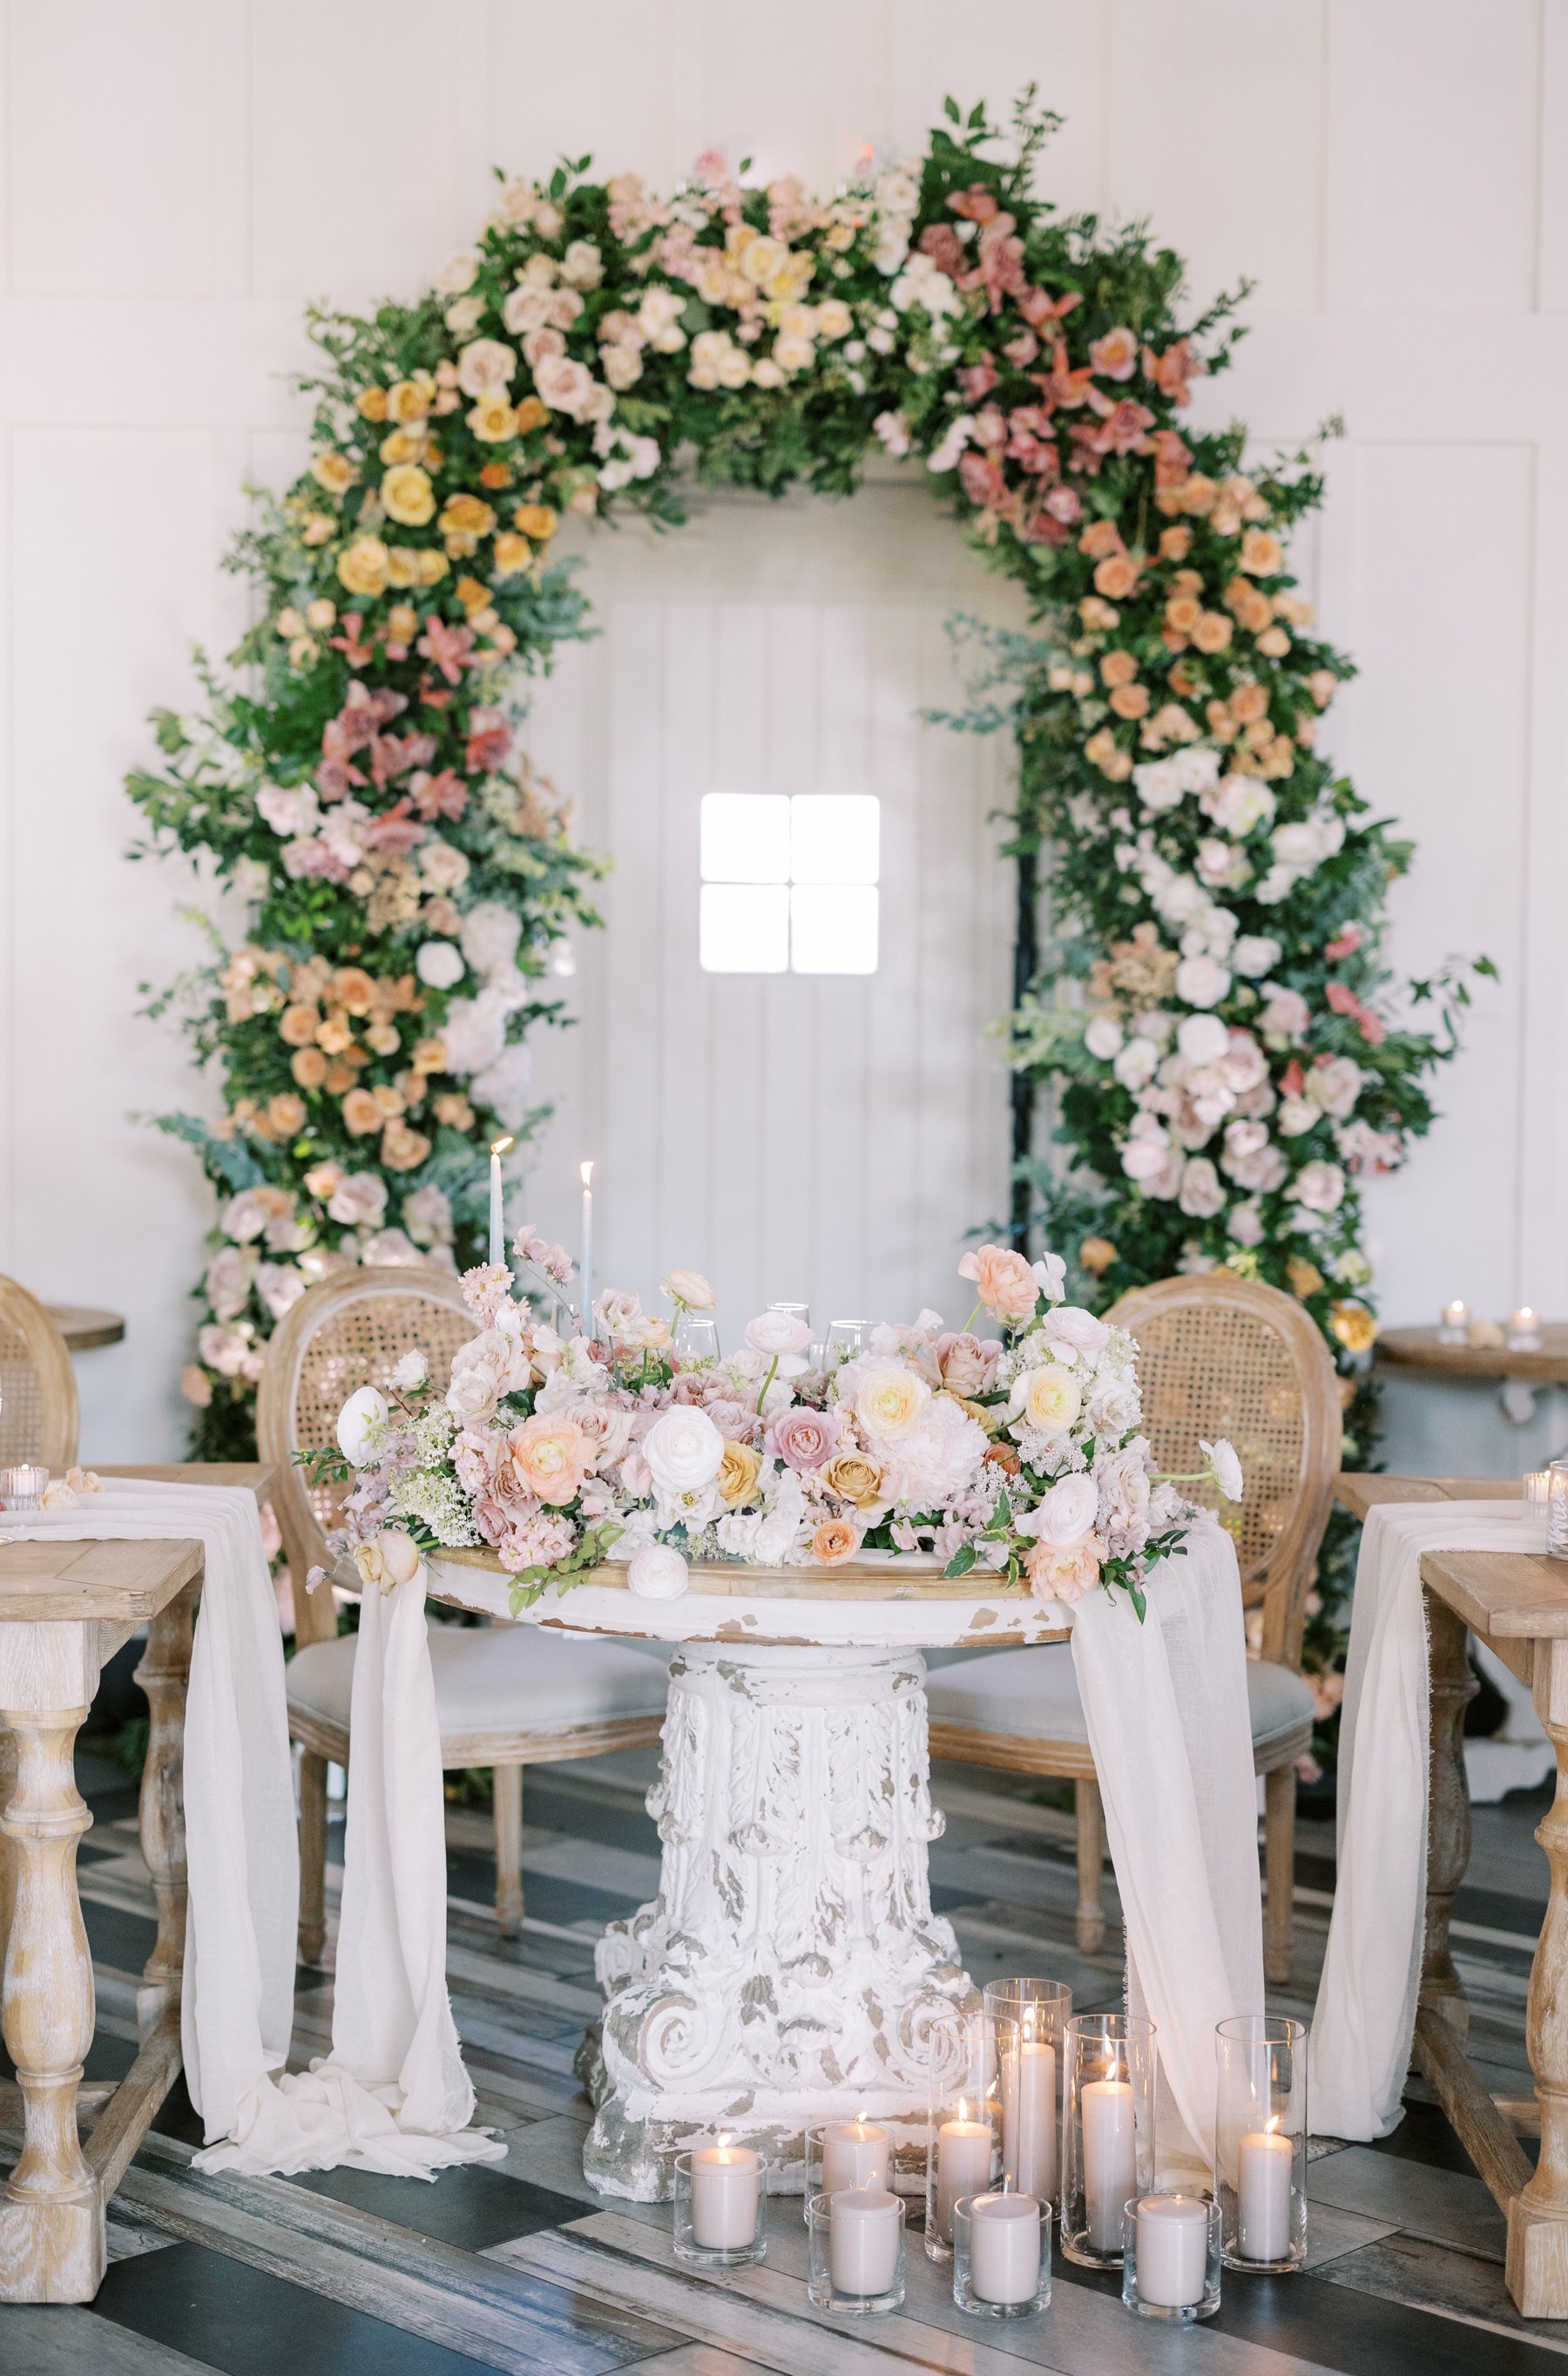 French Country sweetheart table with cane back chairs, pastel flowers, and a gauze runner